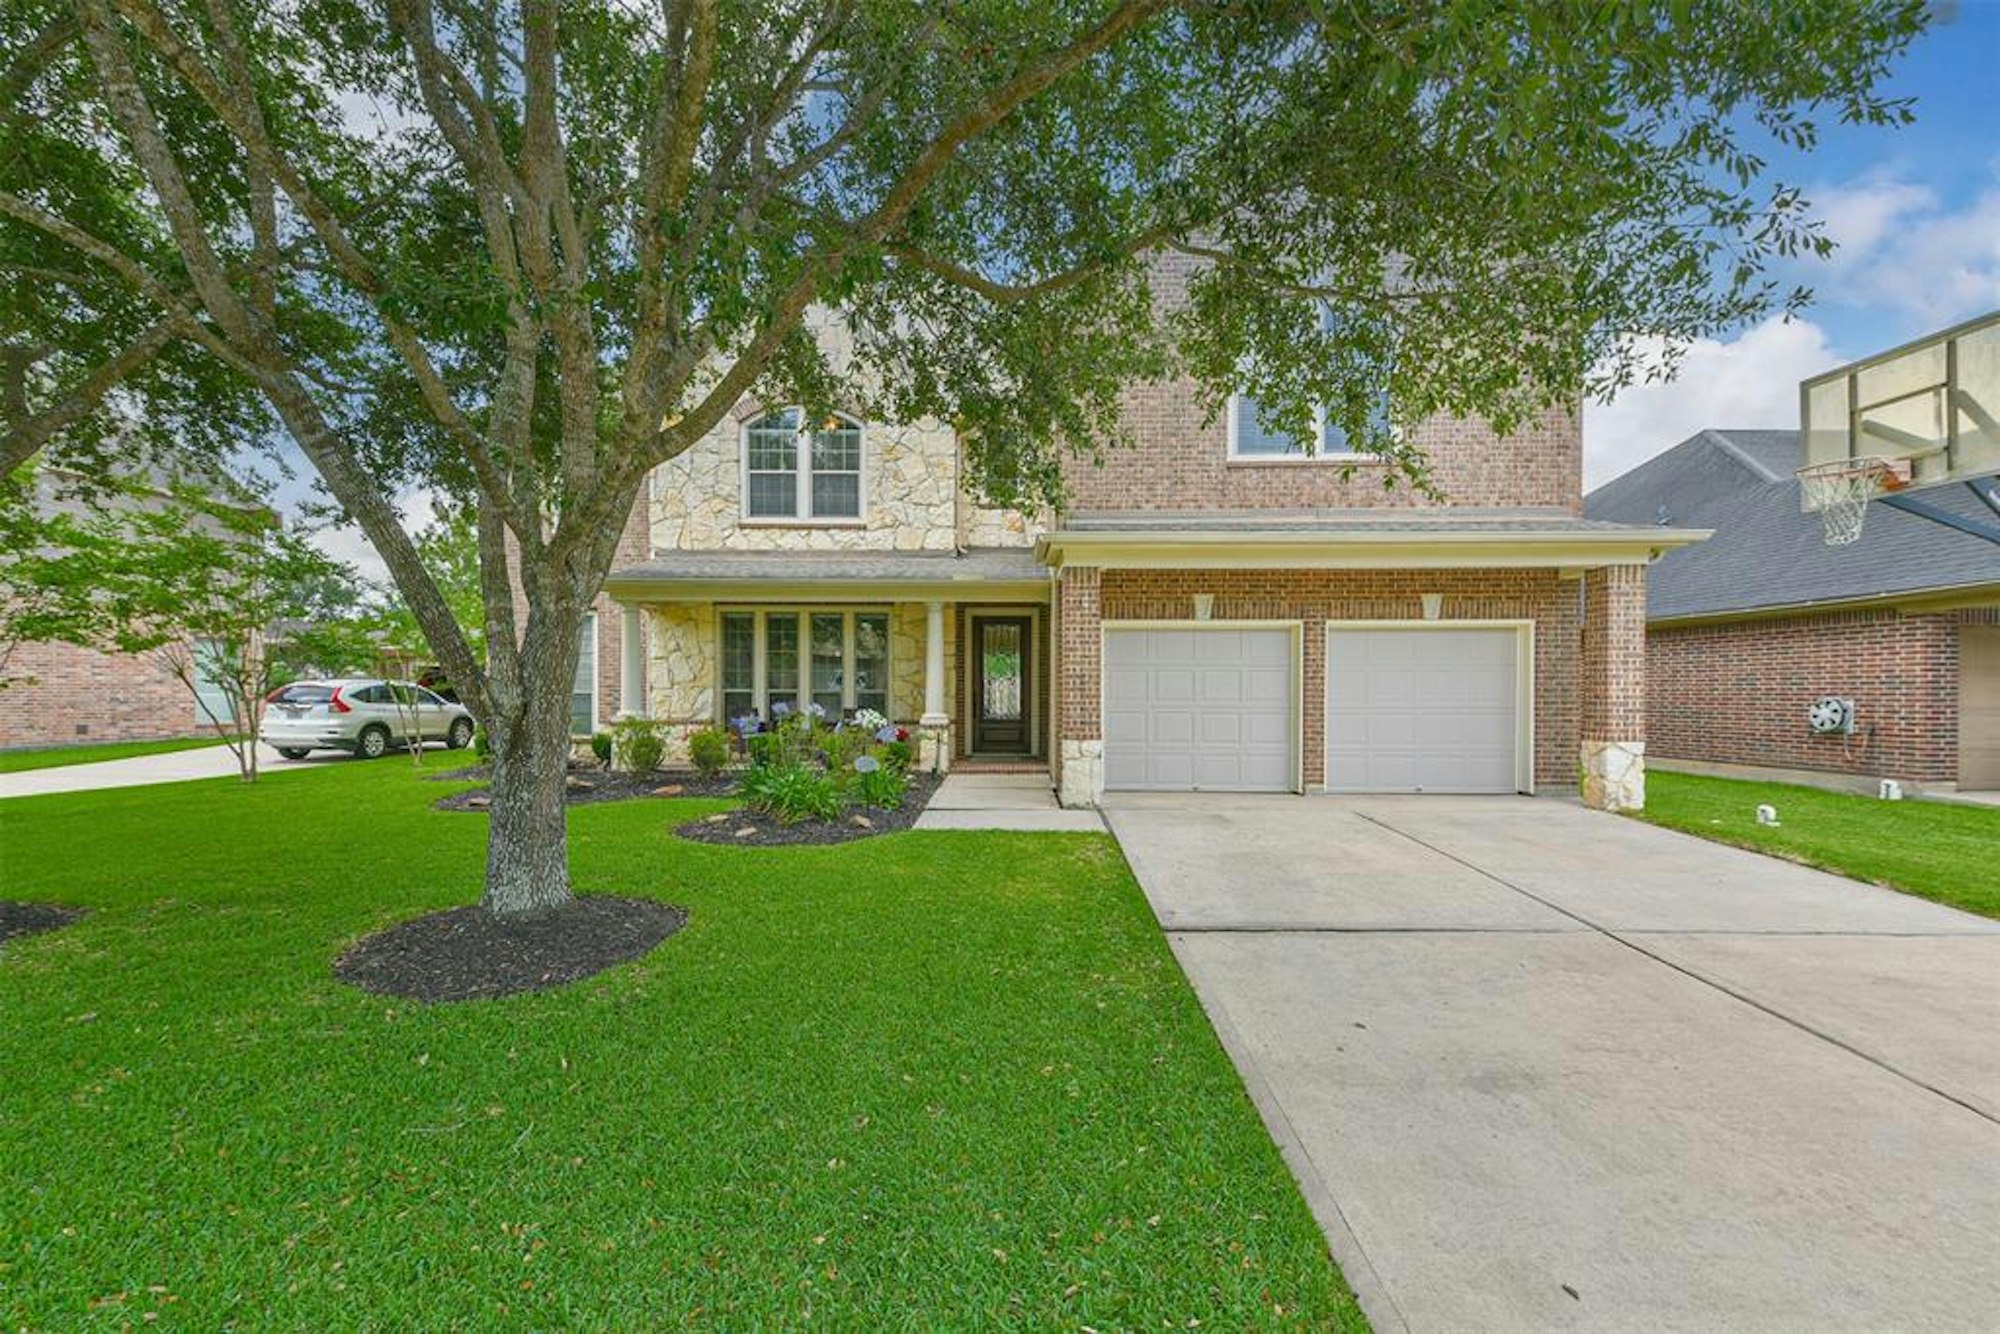 Photo 1 of 26 - 2505 Rockygate Ln, Friendswood, TX 77546